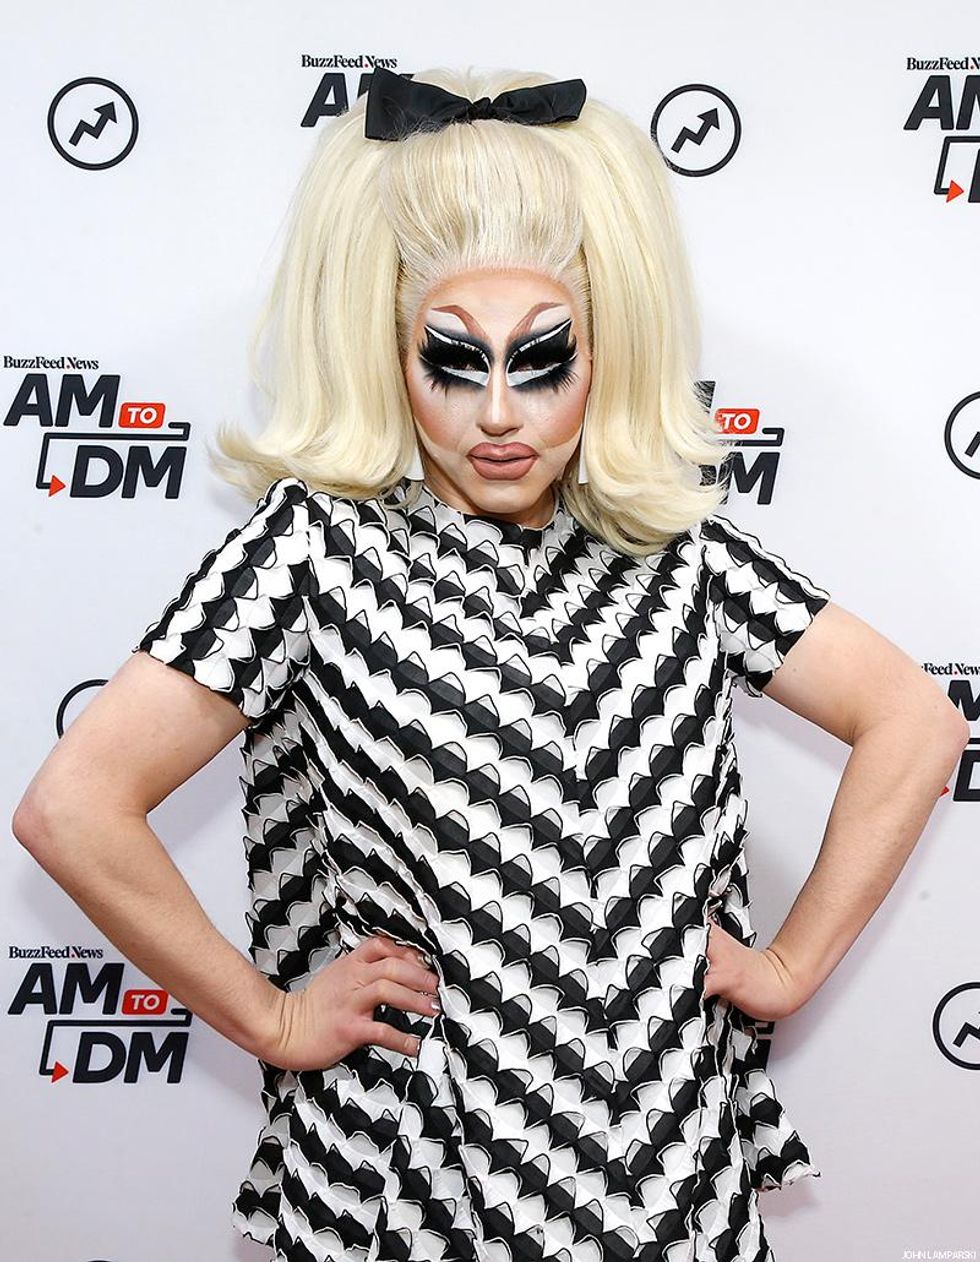 Trixie Mattel owner of Milwaukee's This Is It! bar